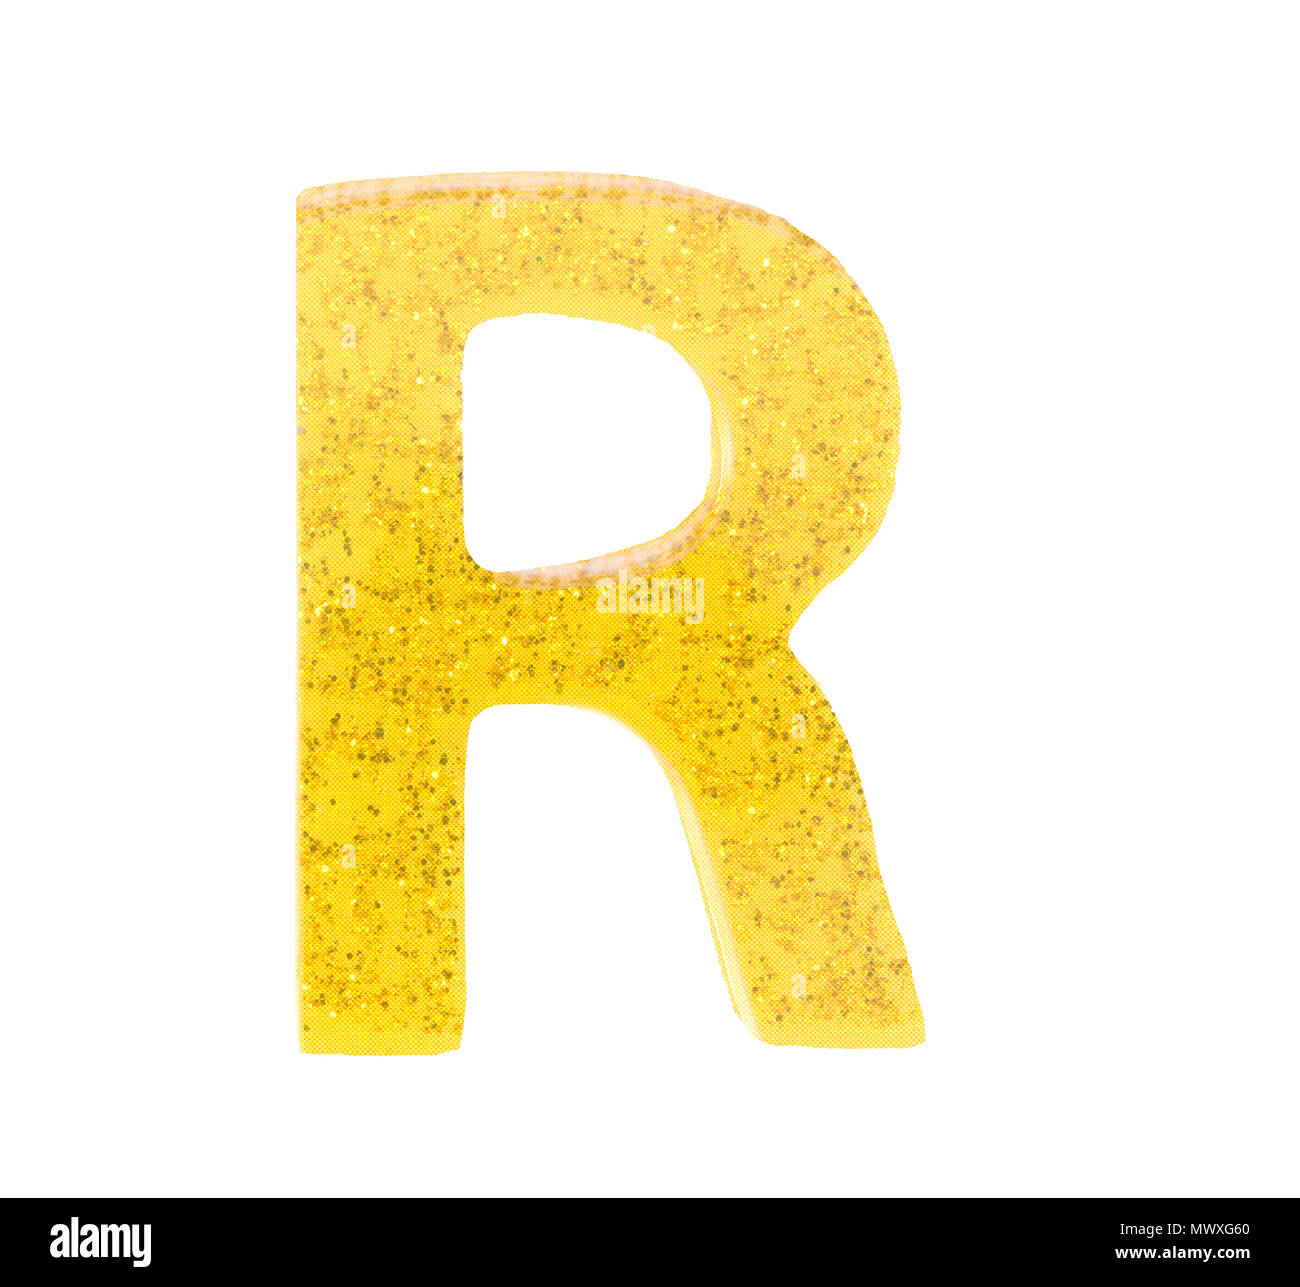 Letter R Alphabet Symbol English Letter English Alphabet From Yellow Golden On A White Background With Clipping Path Stock Photo Alamy